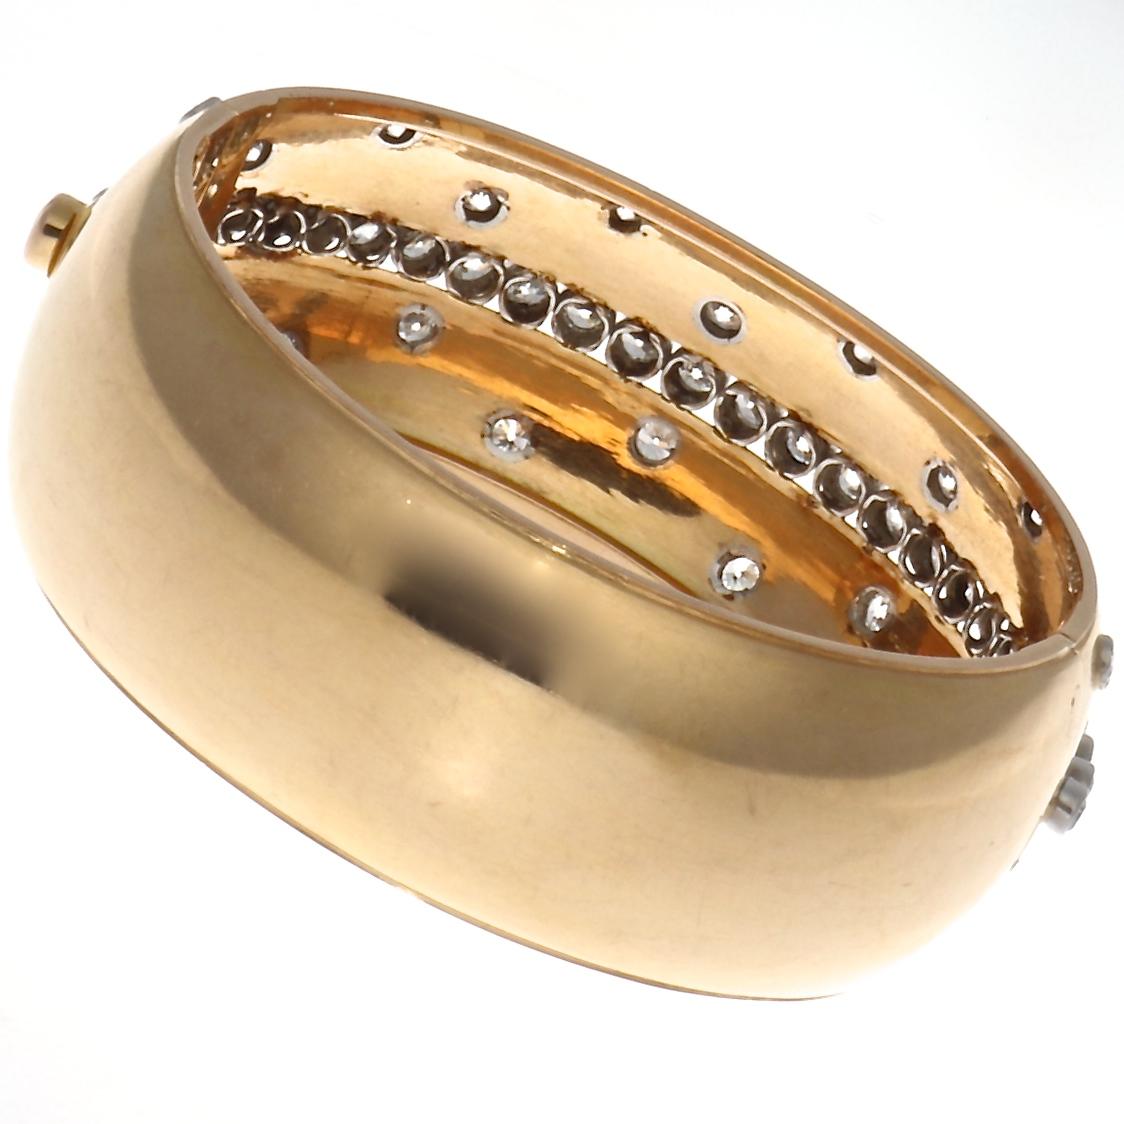 French retro 18k yellow gold and diamond bracelet, consisting of 48 old European cut diamonds, approximately 7 carats total weight, G-H color SI clarity. A fabulous display of well placed diamonds on this (inch wide) hinged bangle from 1940's